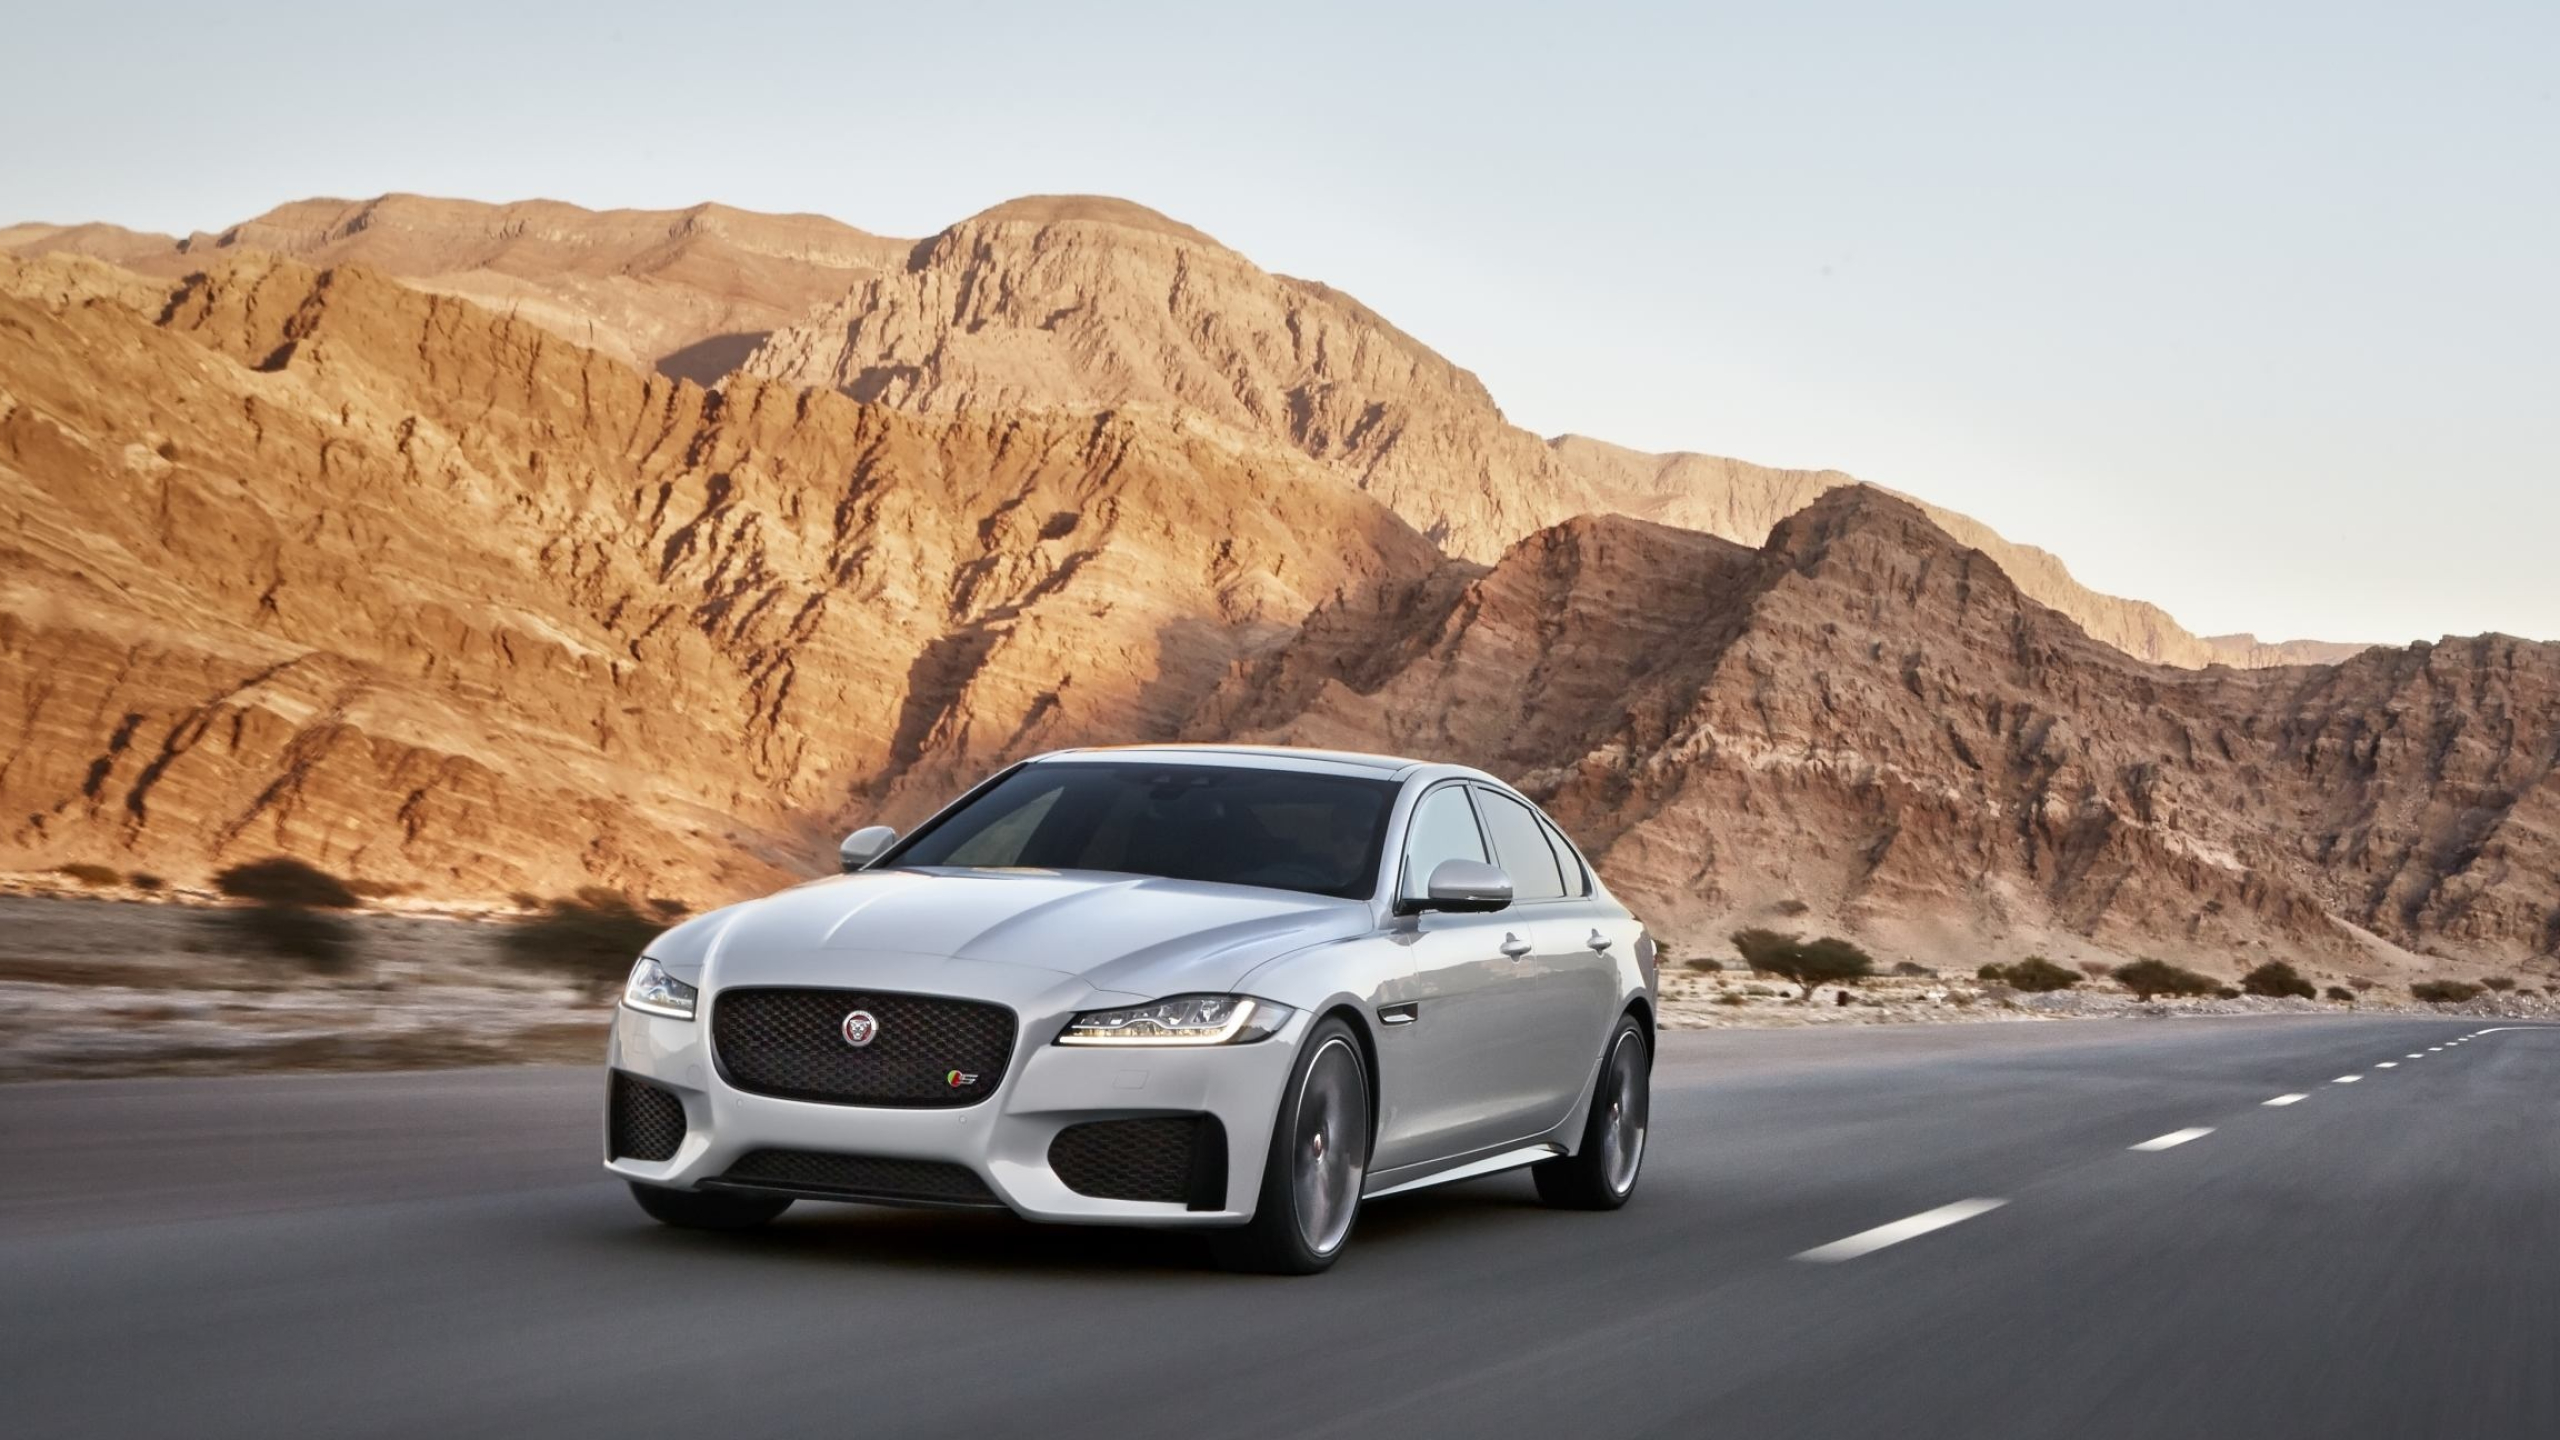 Jaguar XF wallpapers, Variety of designs, High-quality images, 2560x1440 HD Desktop